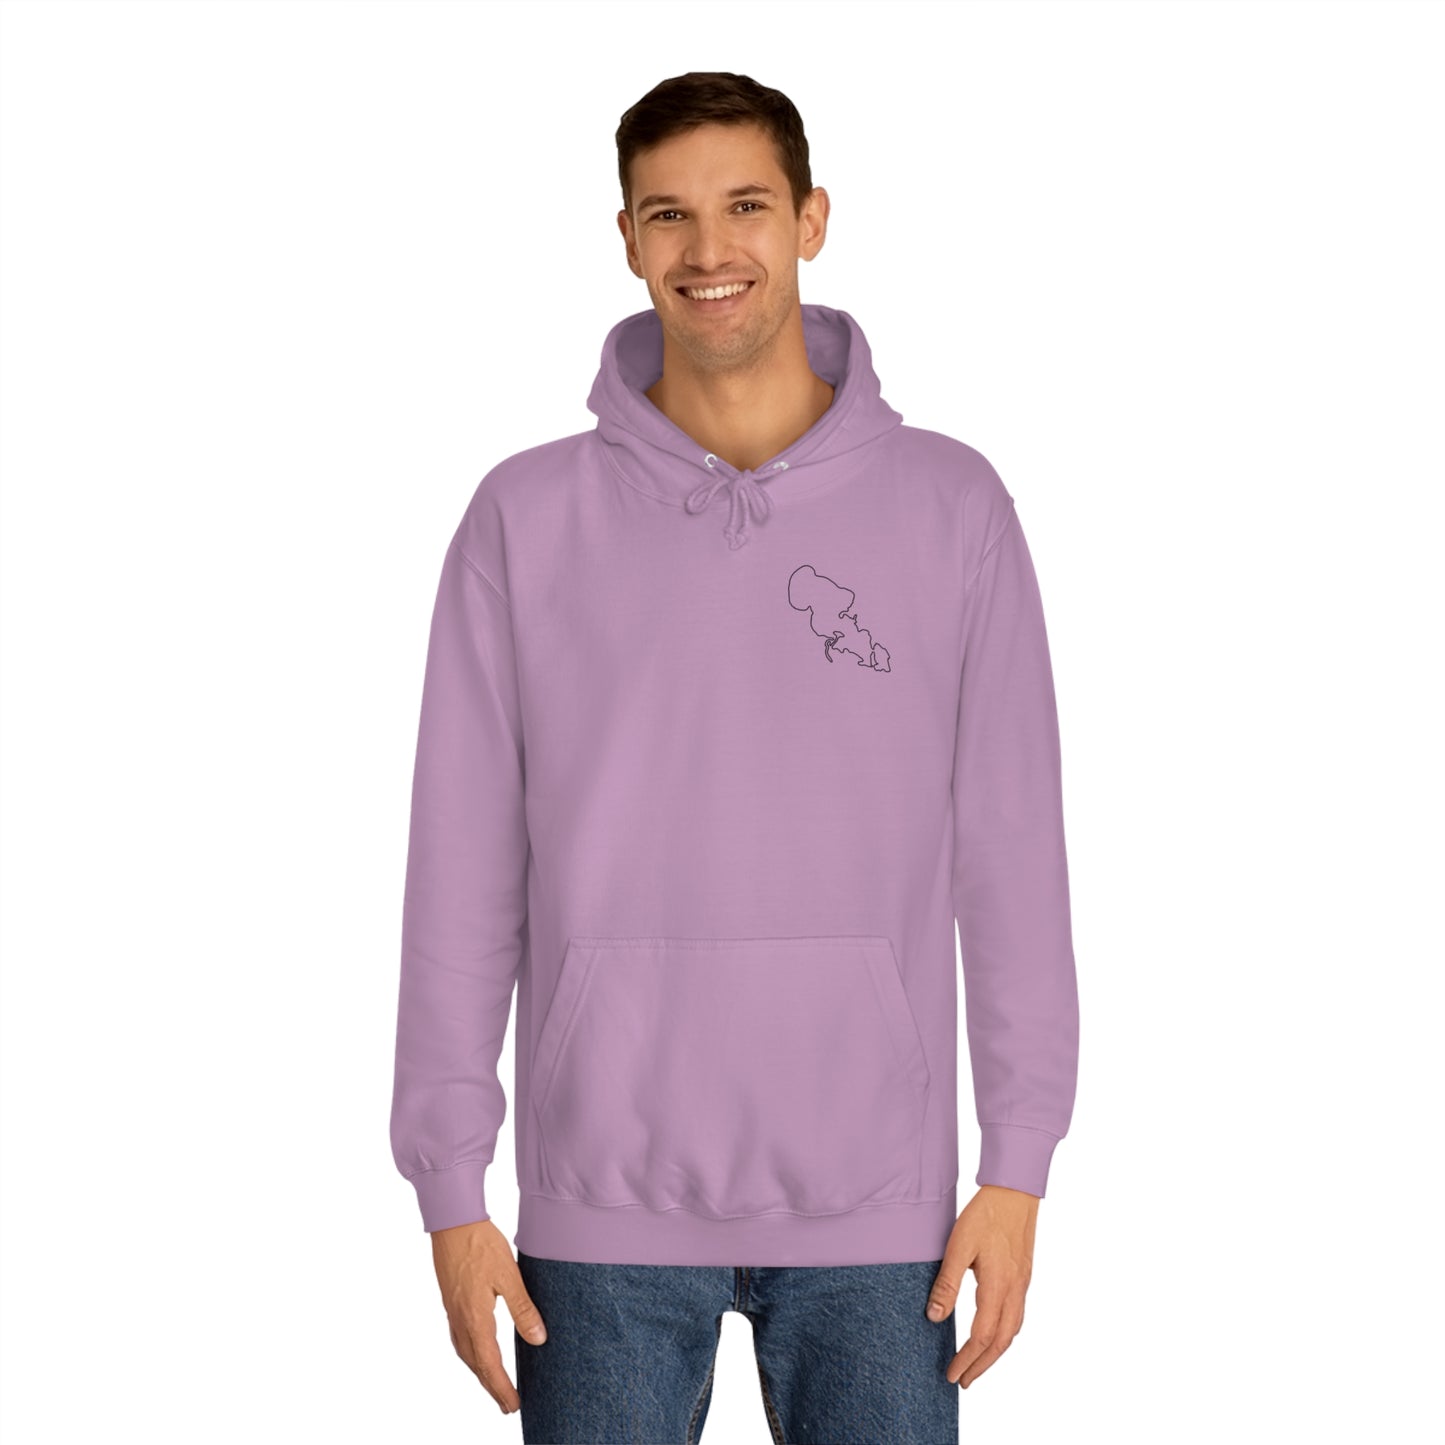 Wakeboard Float Plane - Lac LaBelle Unisex Hoodie Medium Weight